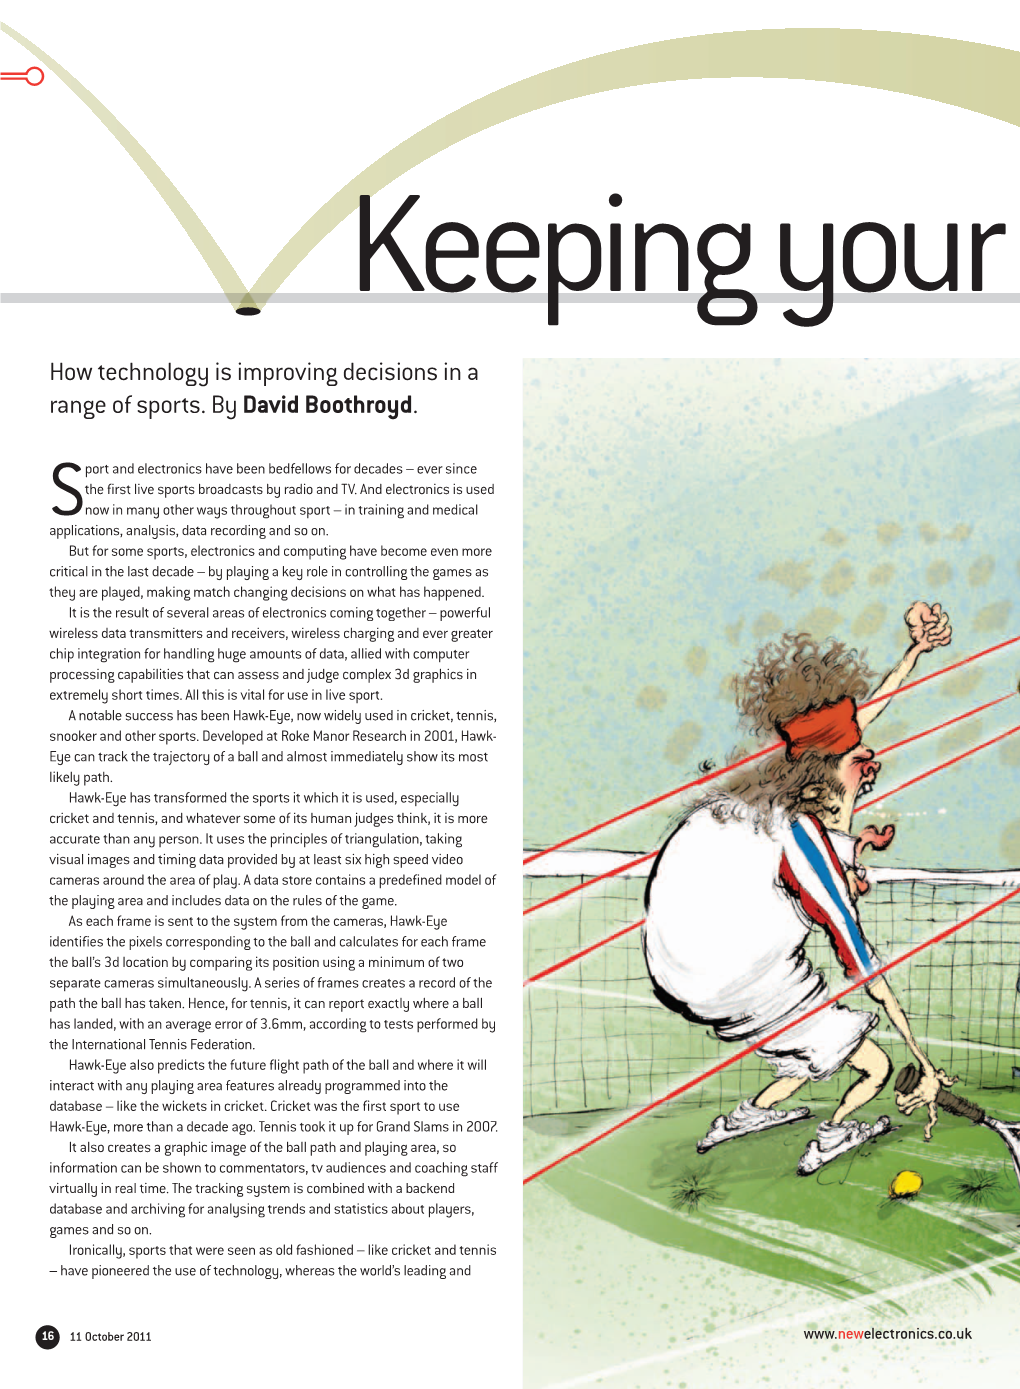 How Technology Is Improving Decisions in a Range of Sports. by David Boothroyd